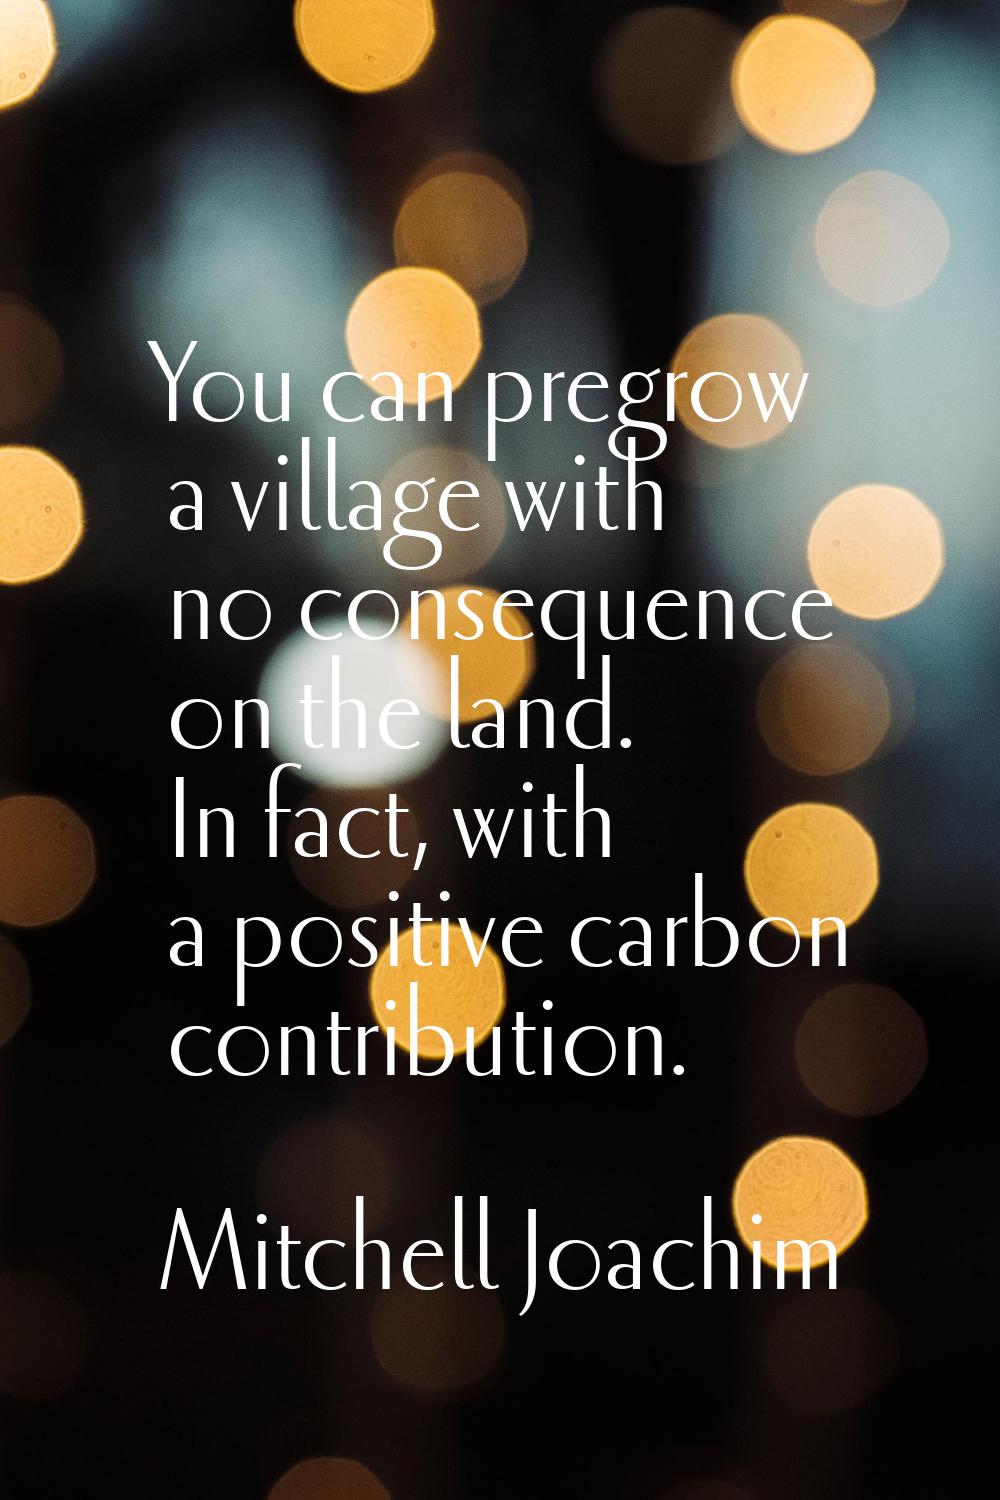 You can pregrow a village with no consequence on the land. In fact, with a positive carbon contribu